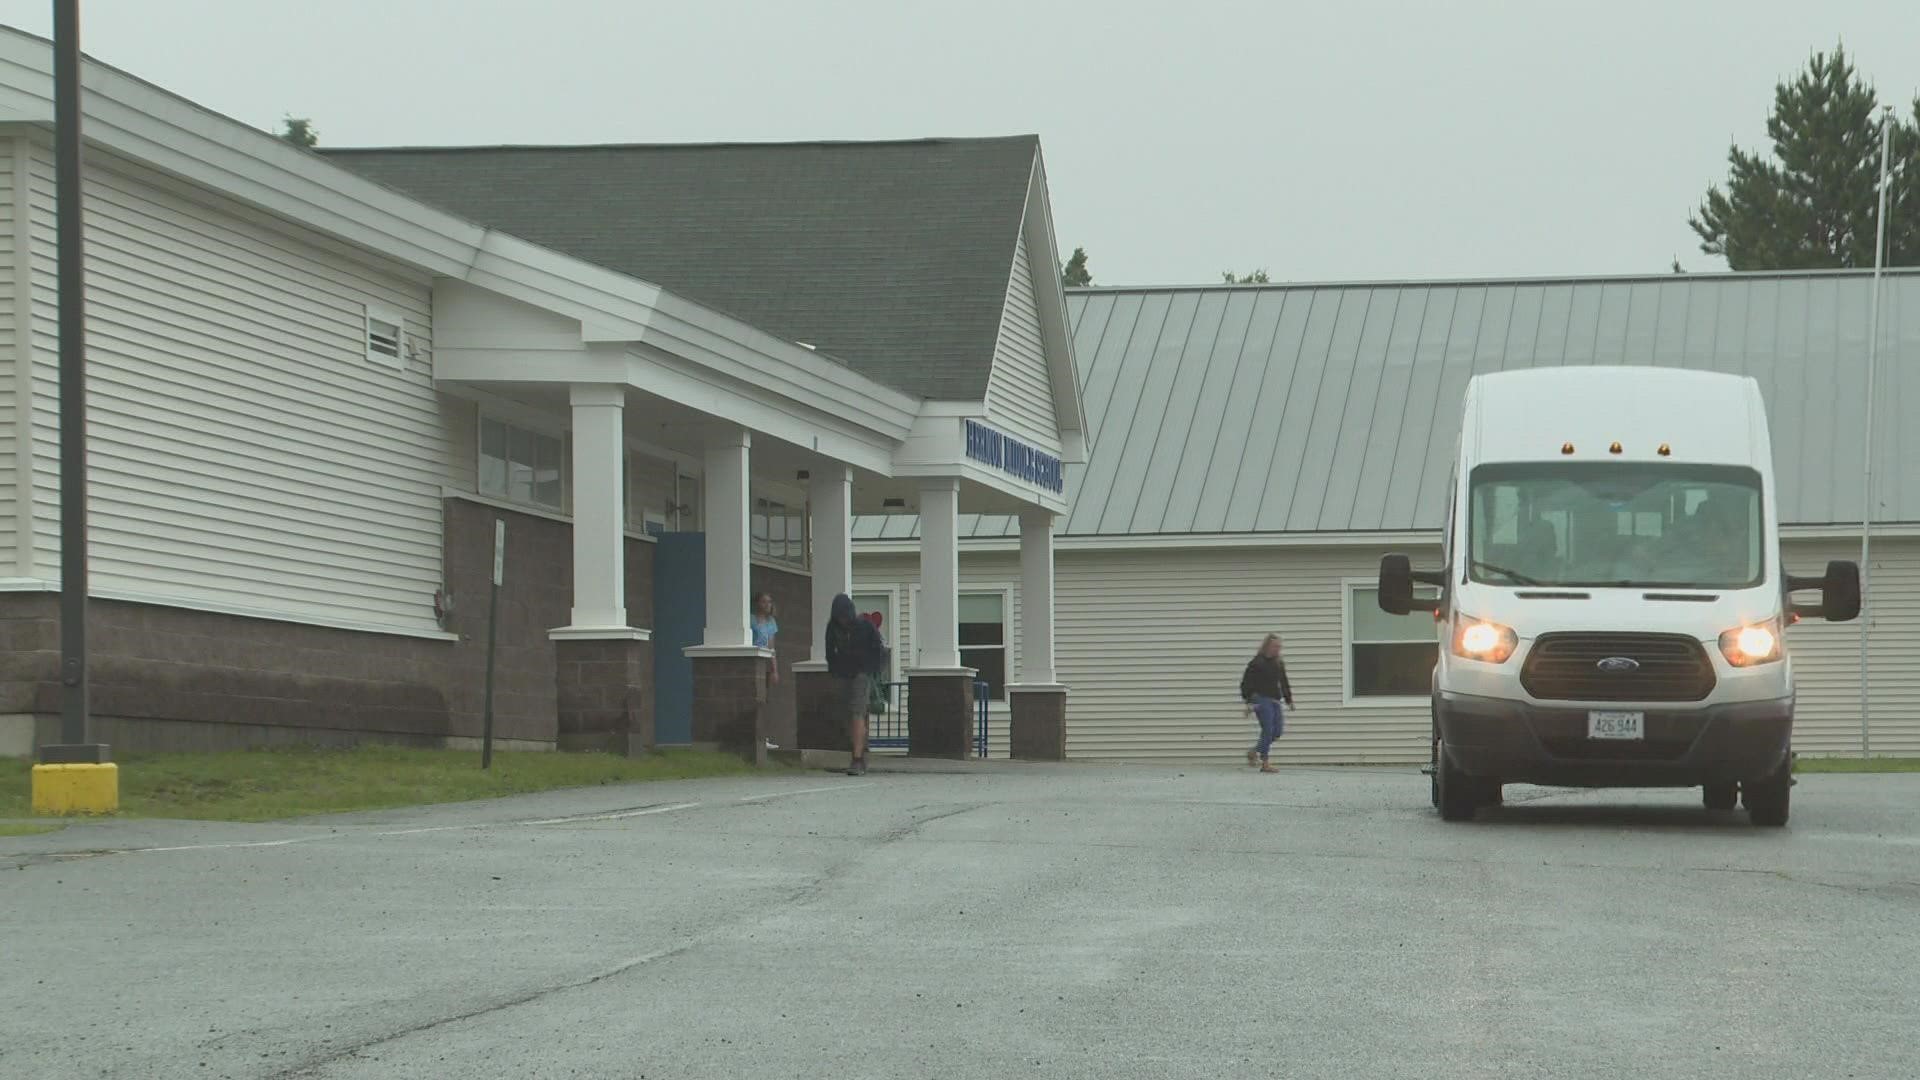 71 school resource officers work in 29 school districts in Maine, but after the alleged inaction of officers in Uvalde, the place of police in schools is questioned.